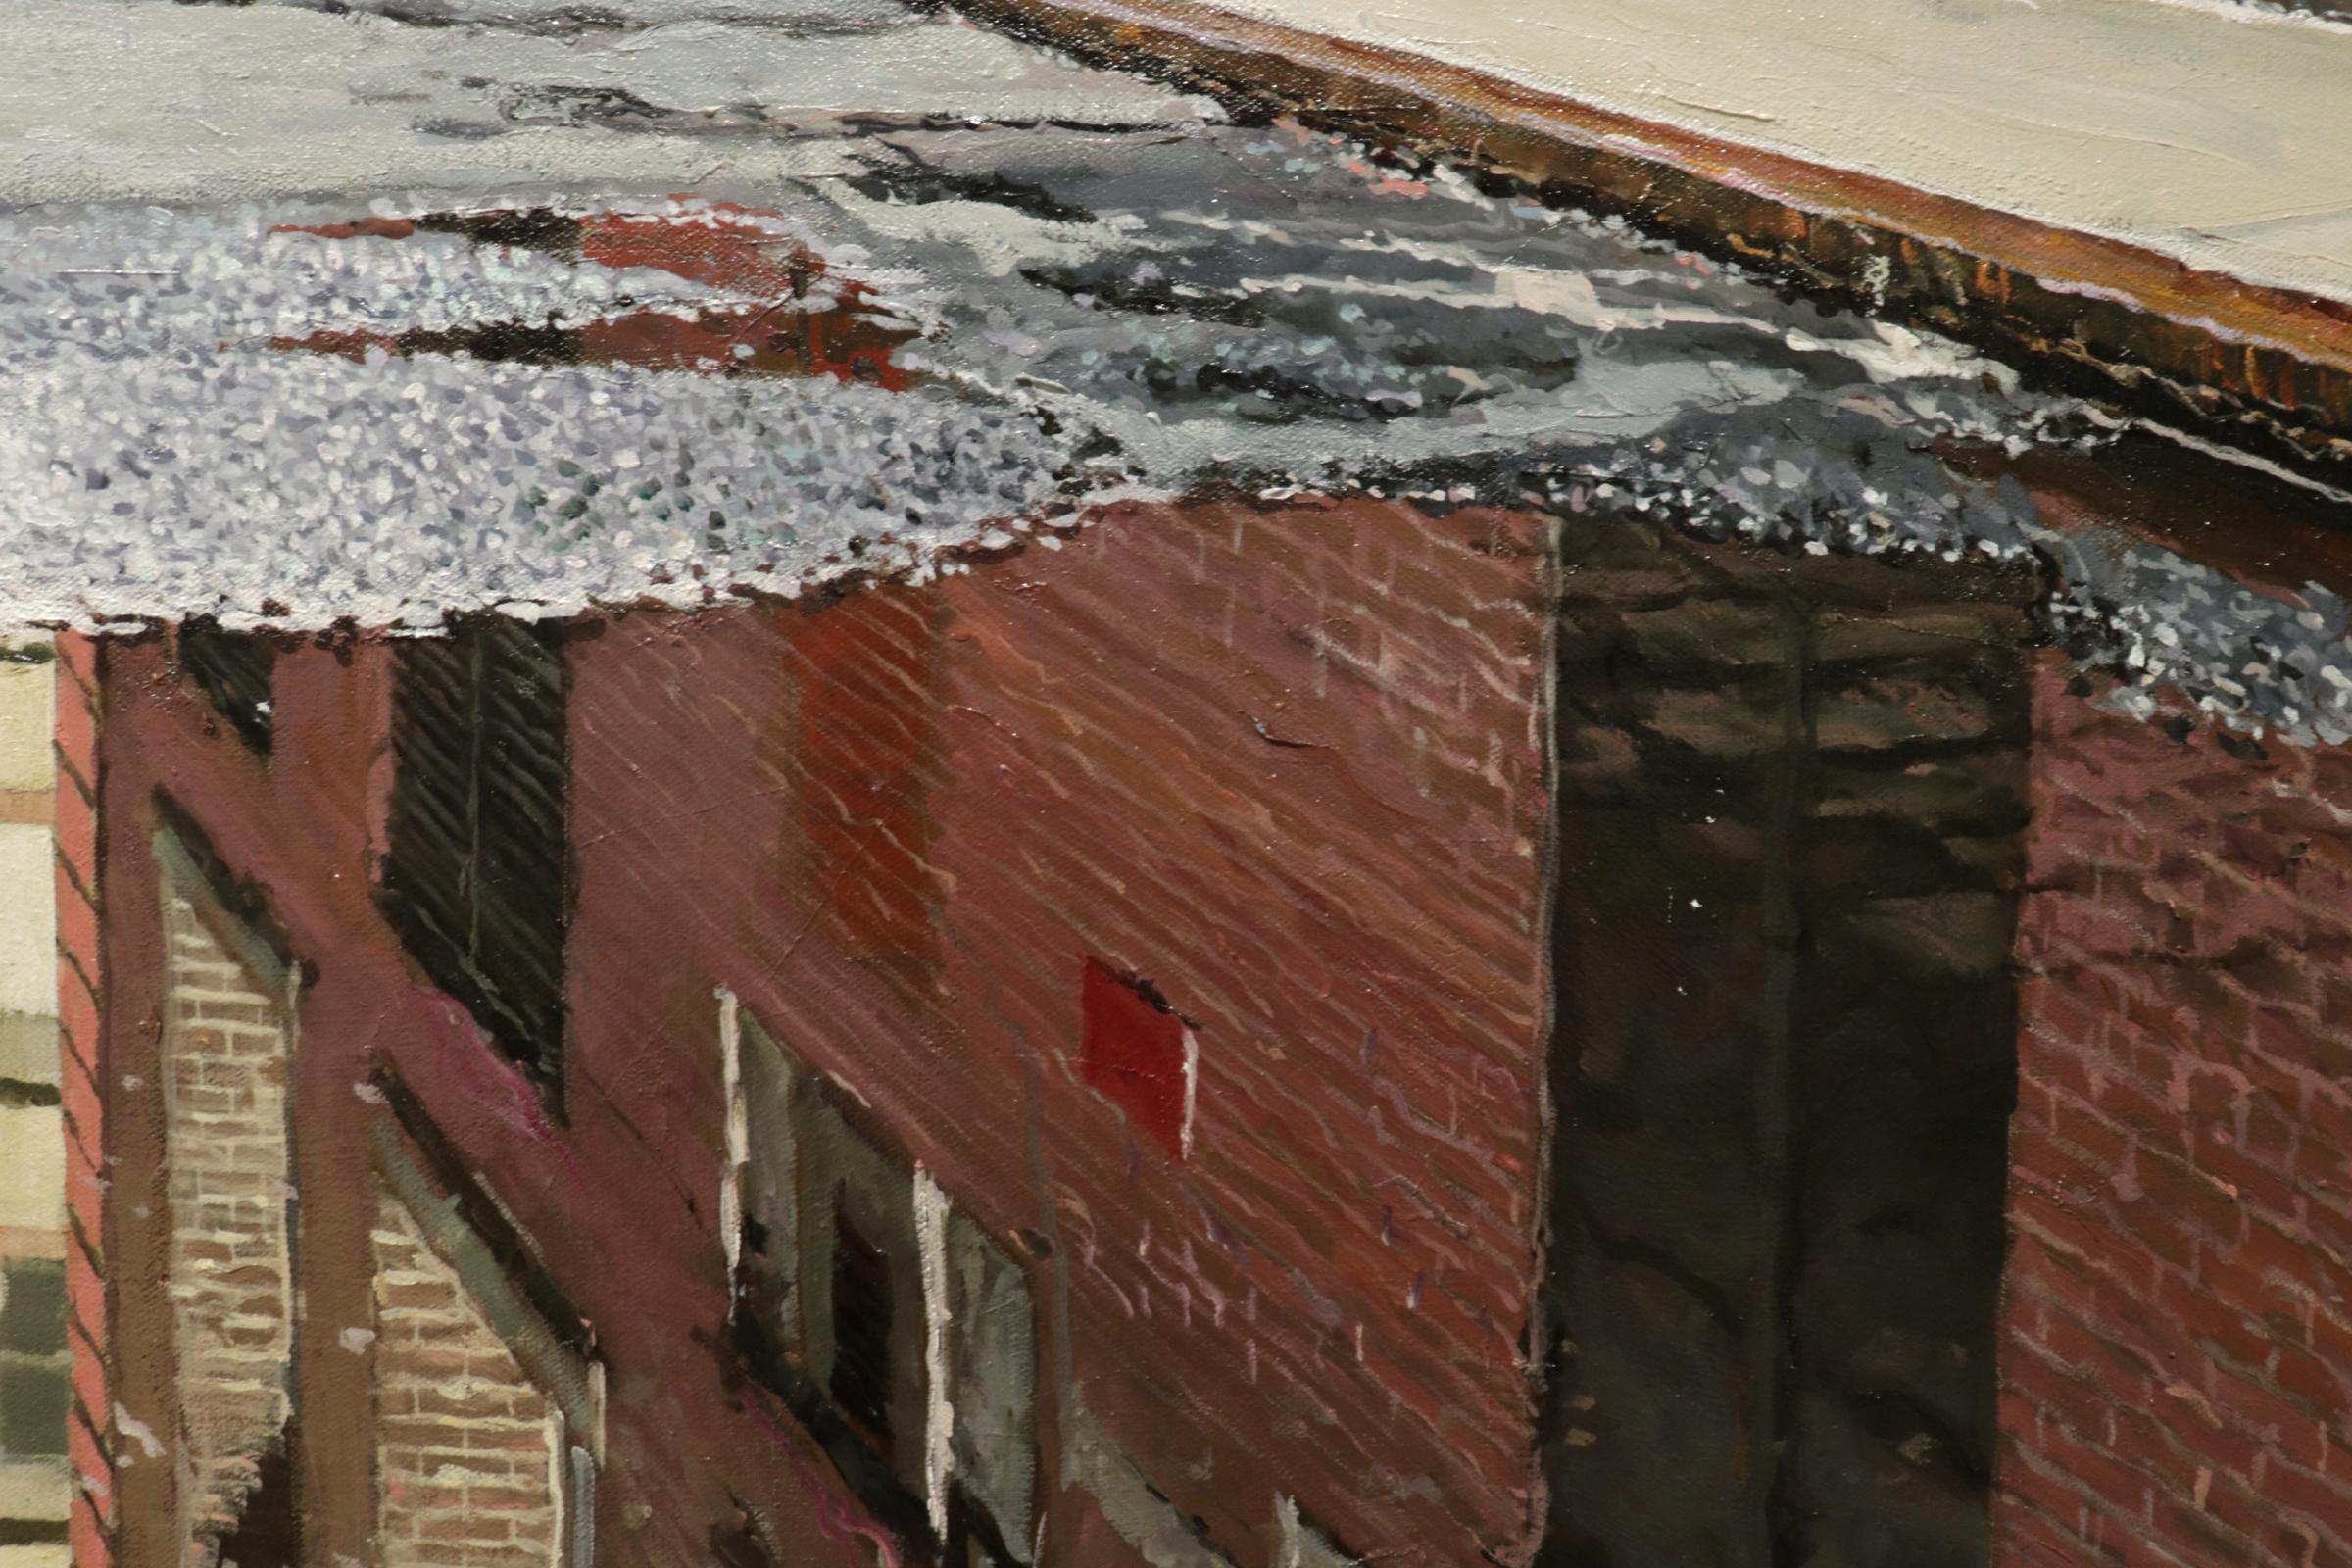 AUTUMN REFLECTIONS STAPLE STREET MANHATTAN, photorealism, red brick, reflection - Contemporary Painting by Richard Combes